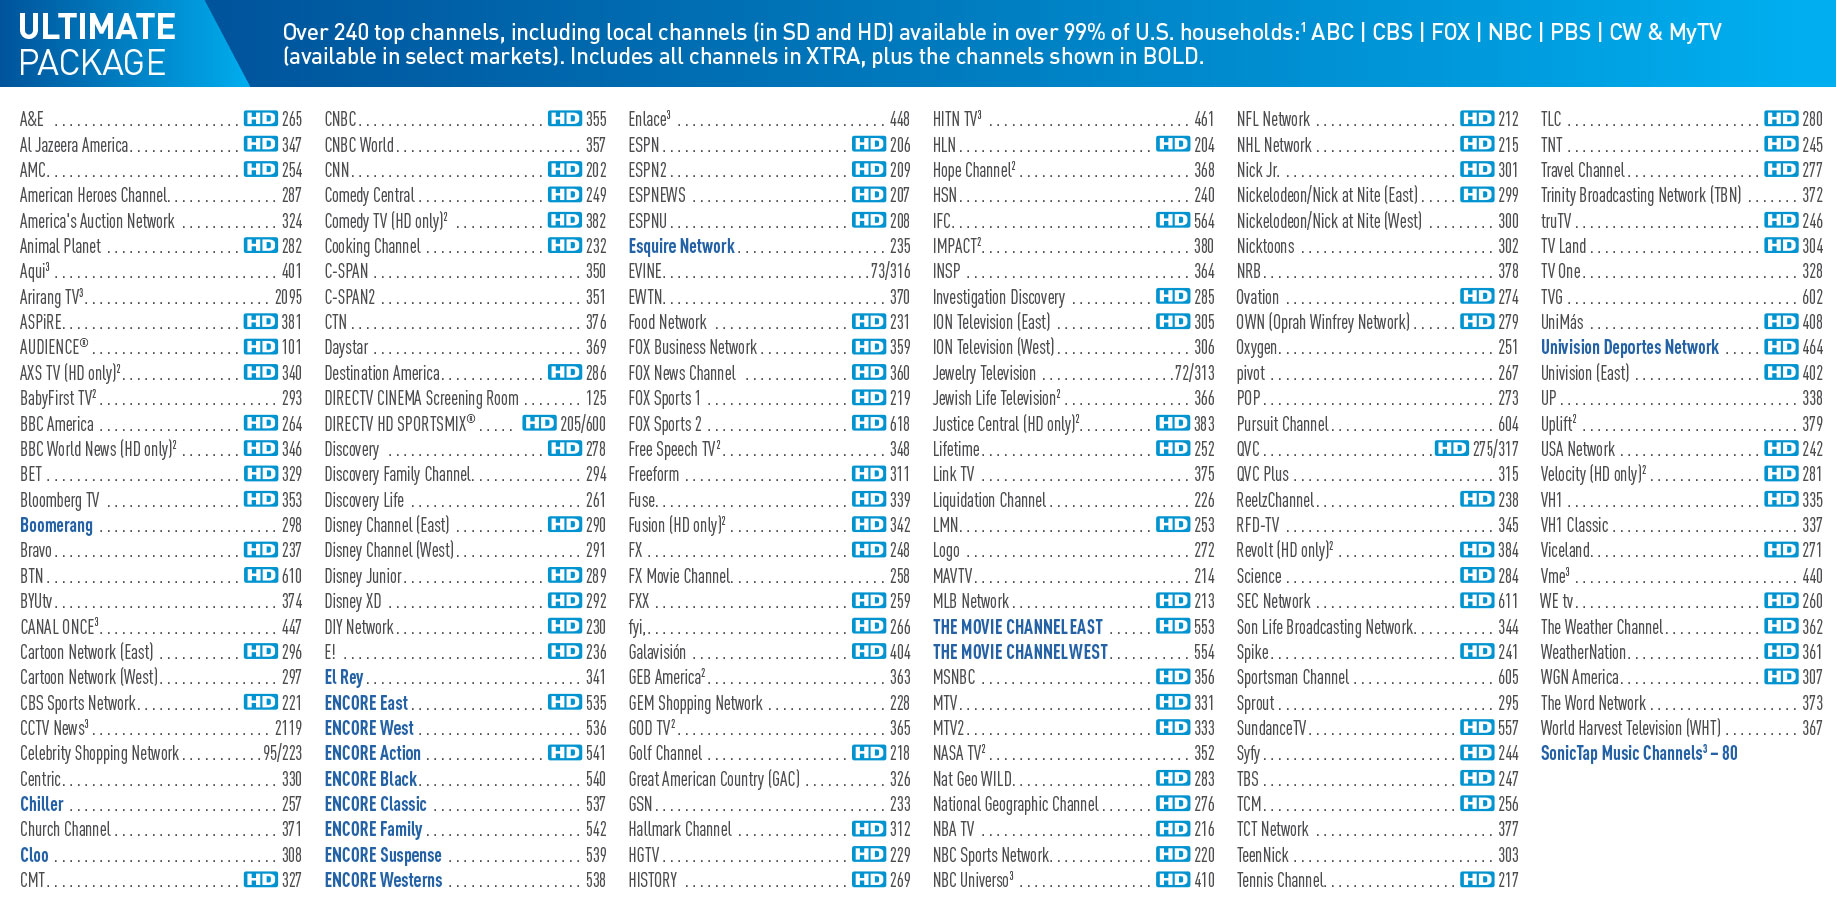 directv-ultimate-package-channel-lineup-printable